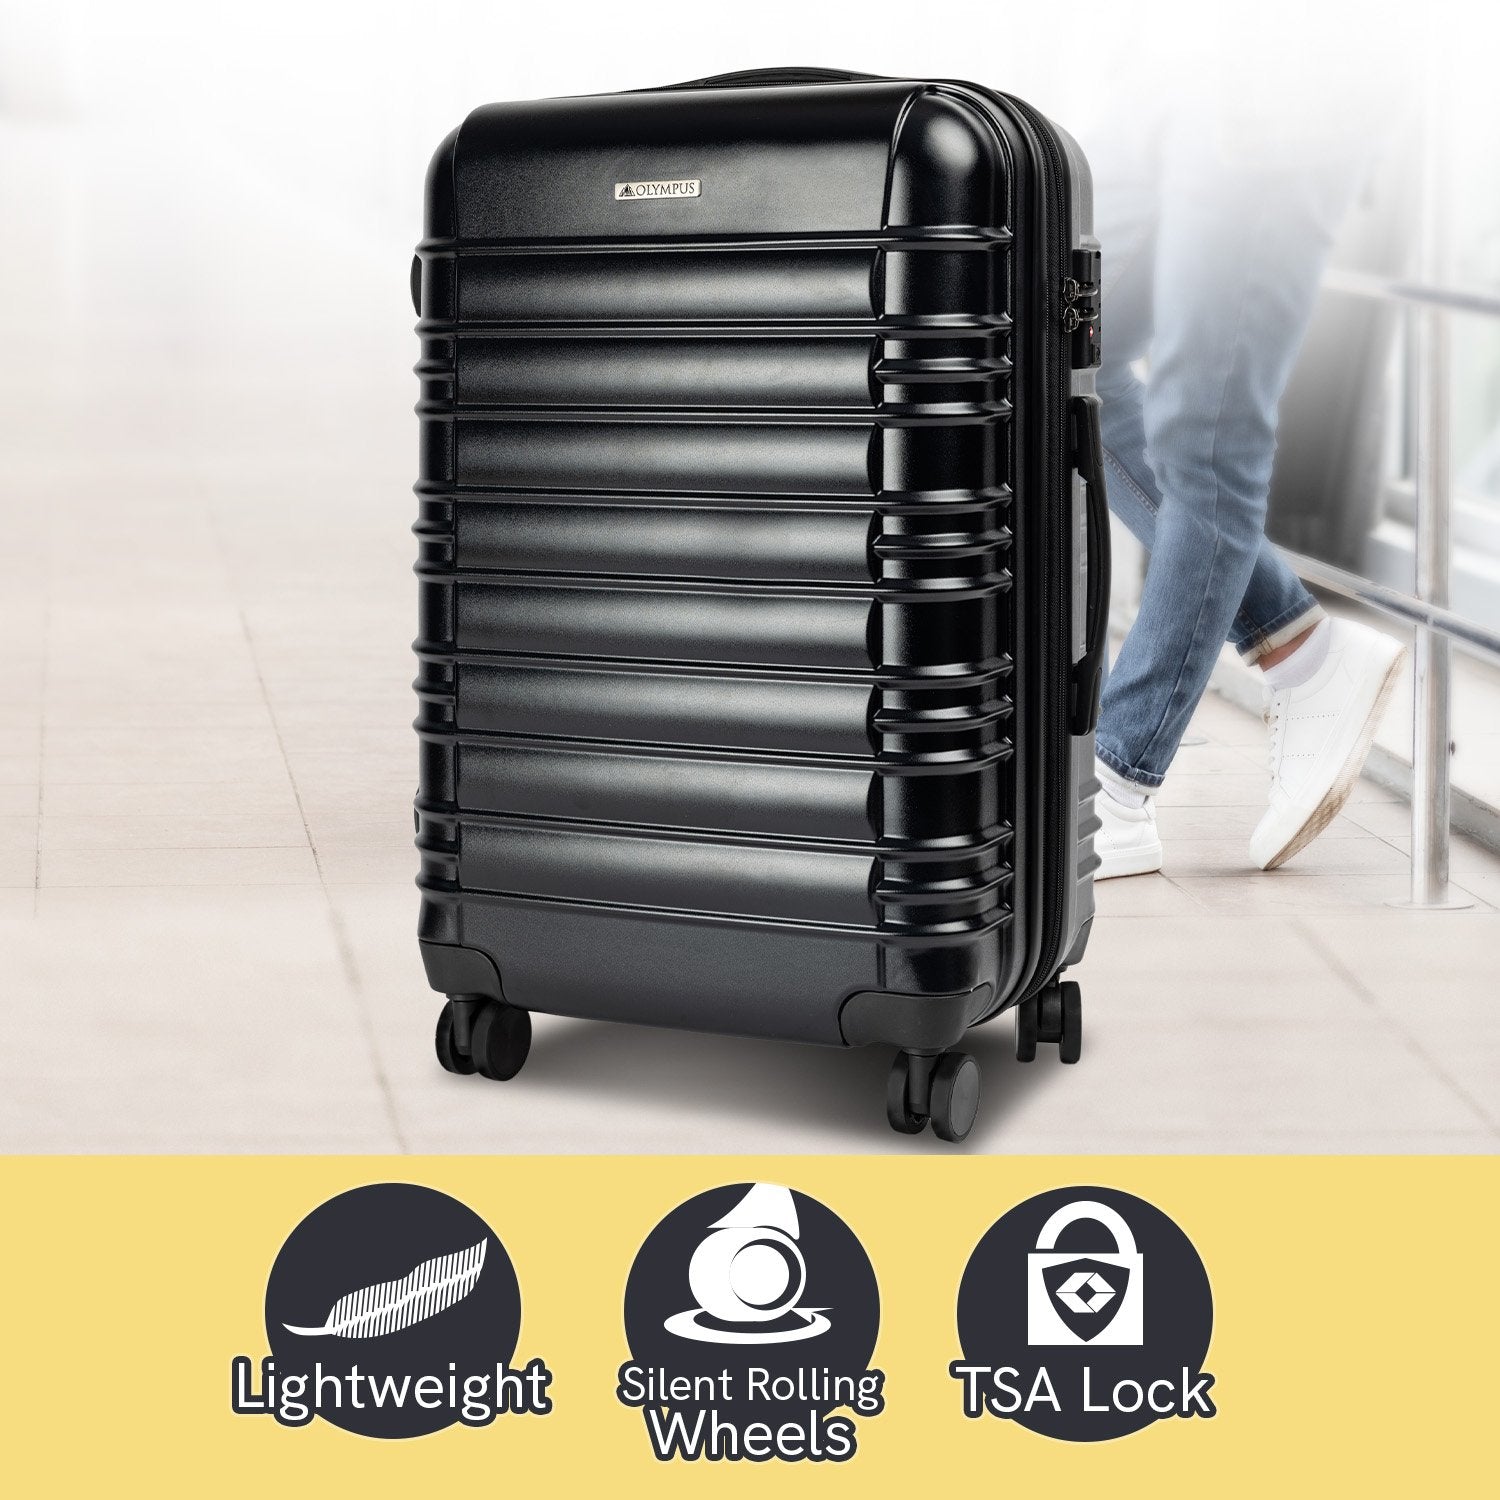 Olympus Noctis Suitcase 20in Hard Shell ABS+PC - Stygian Black-Home &amp; Garden-PEROZ Accessories